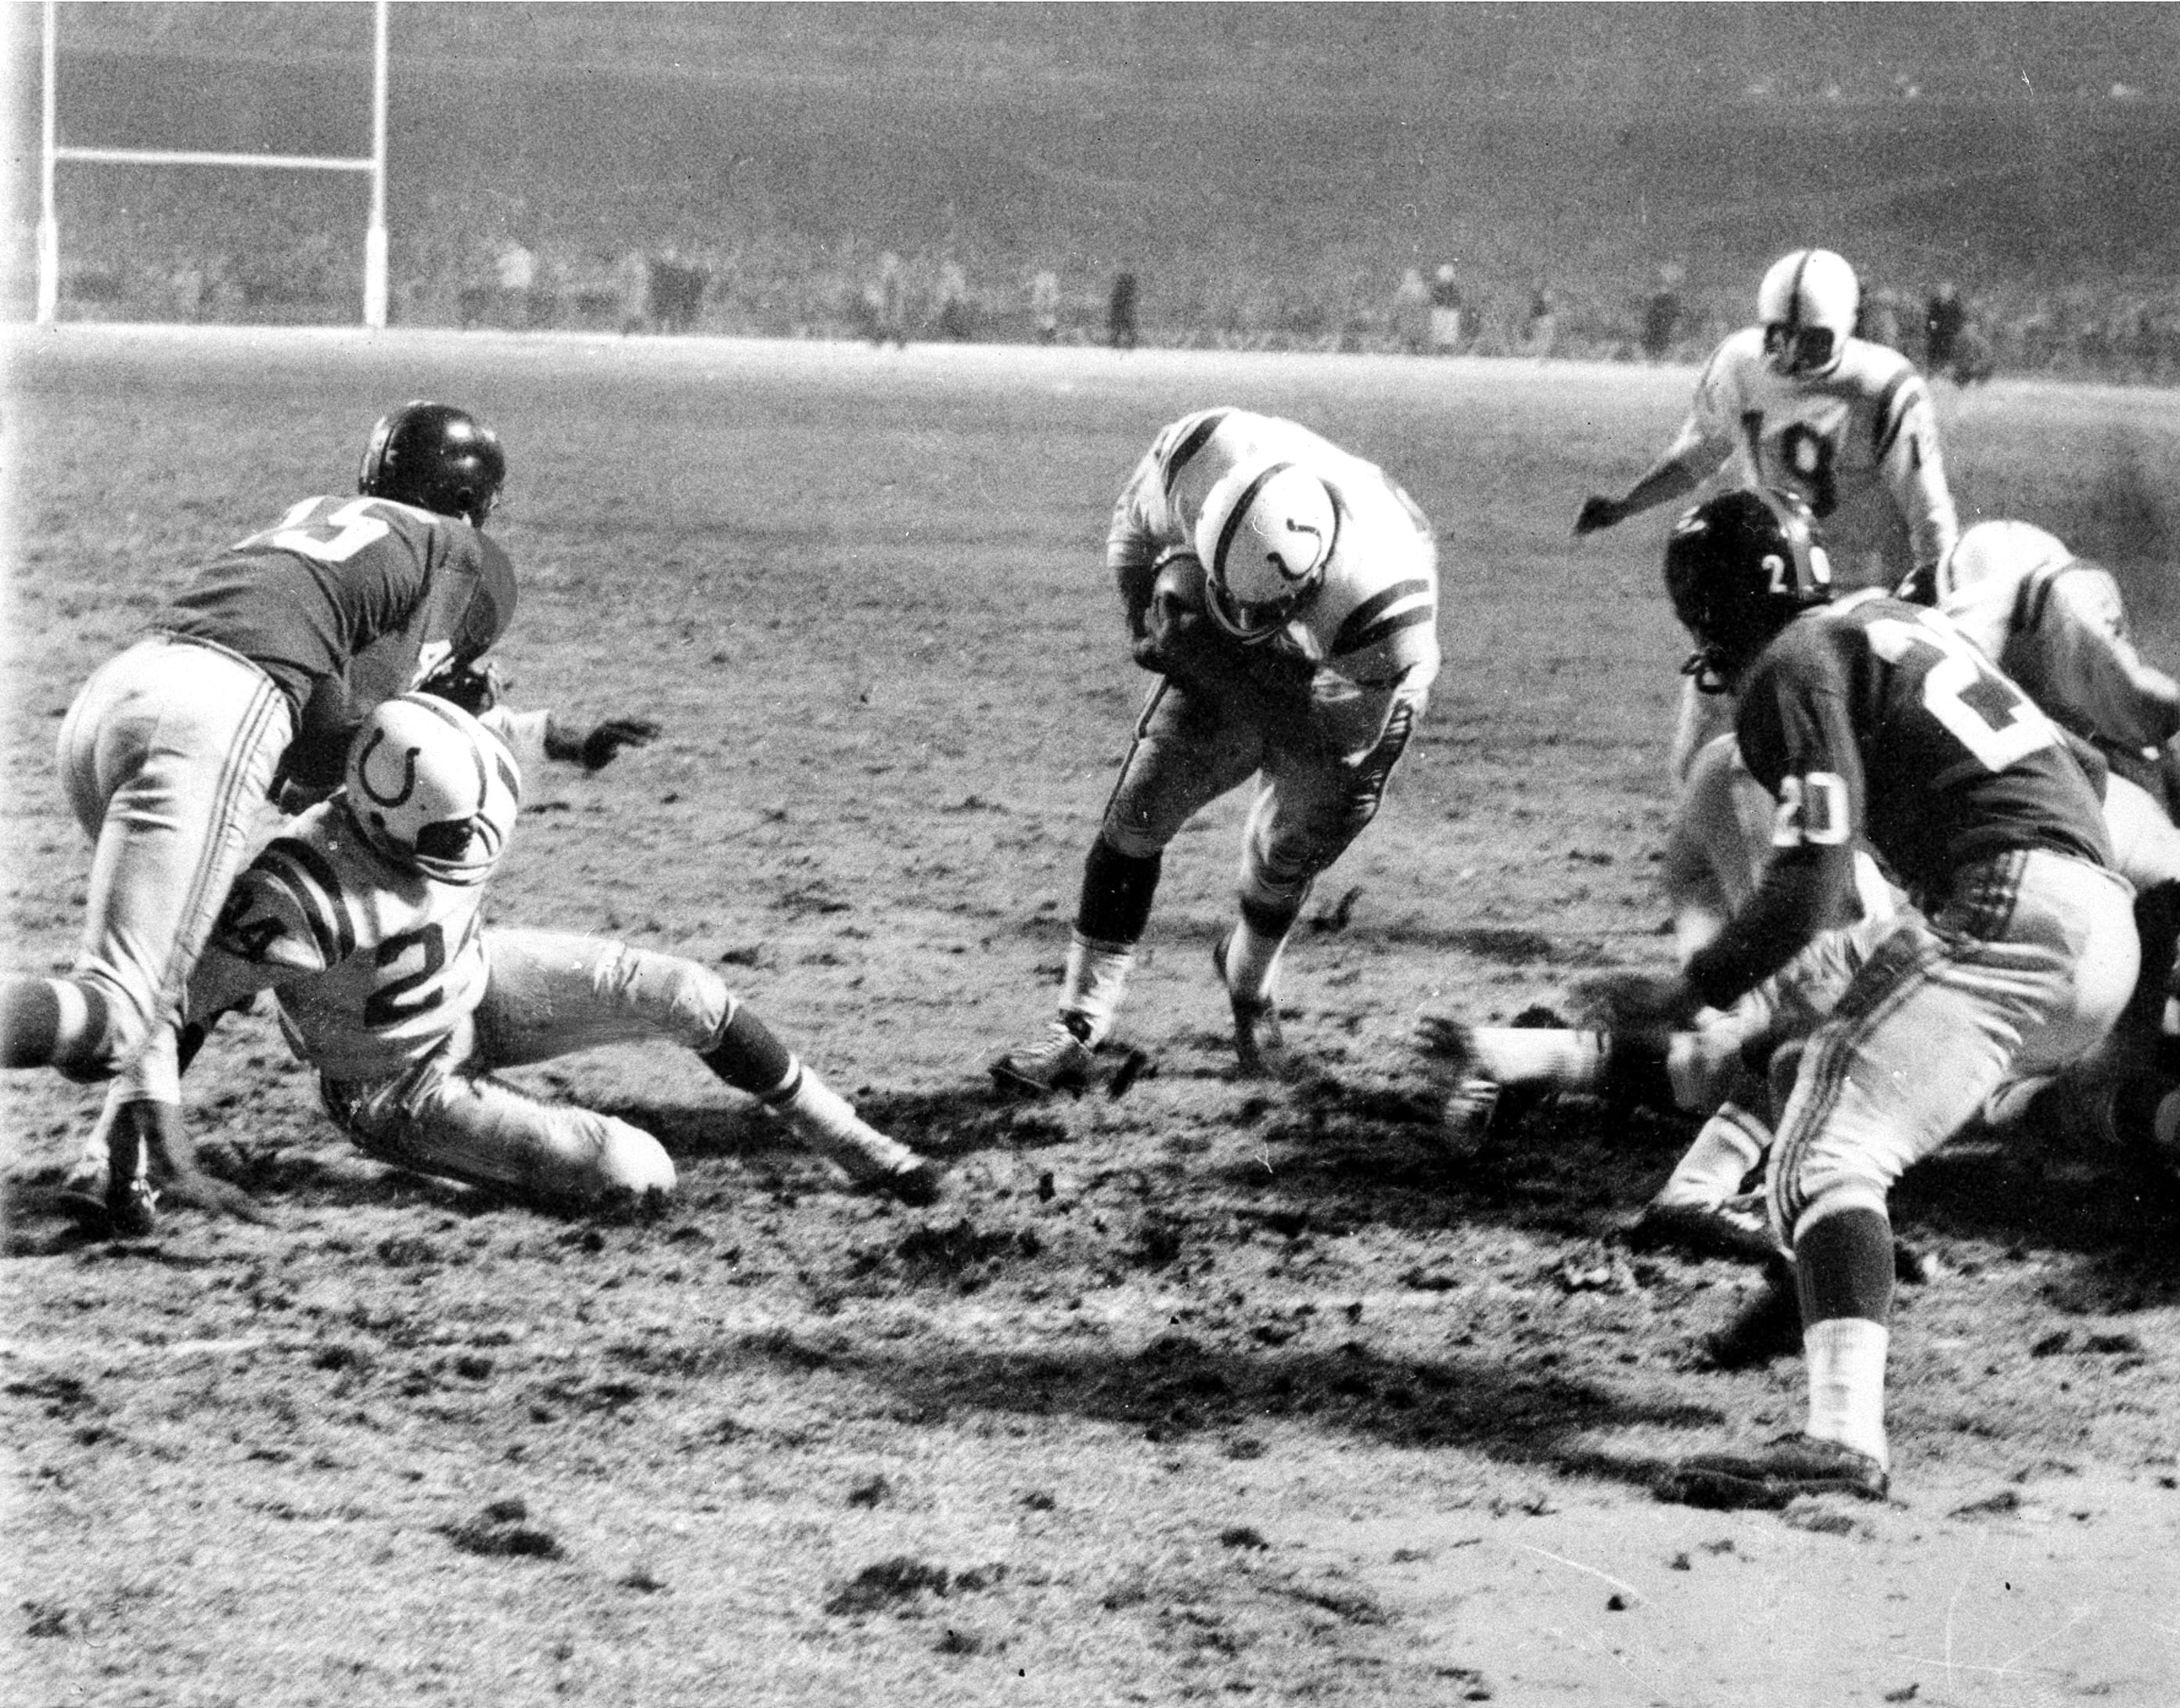 Baltimore Colts fullback Alan Ameche scores a touchdown against the New York Giants in overtime during the 1958 NFL championship game at Yankee Stadium.